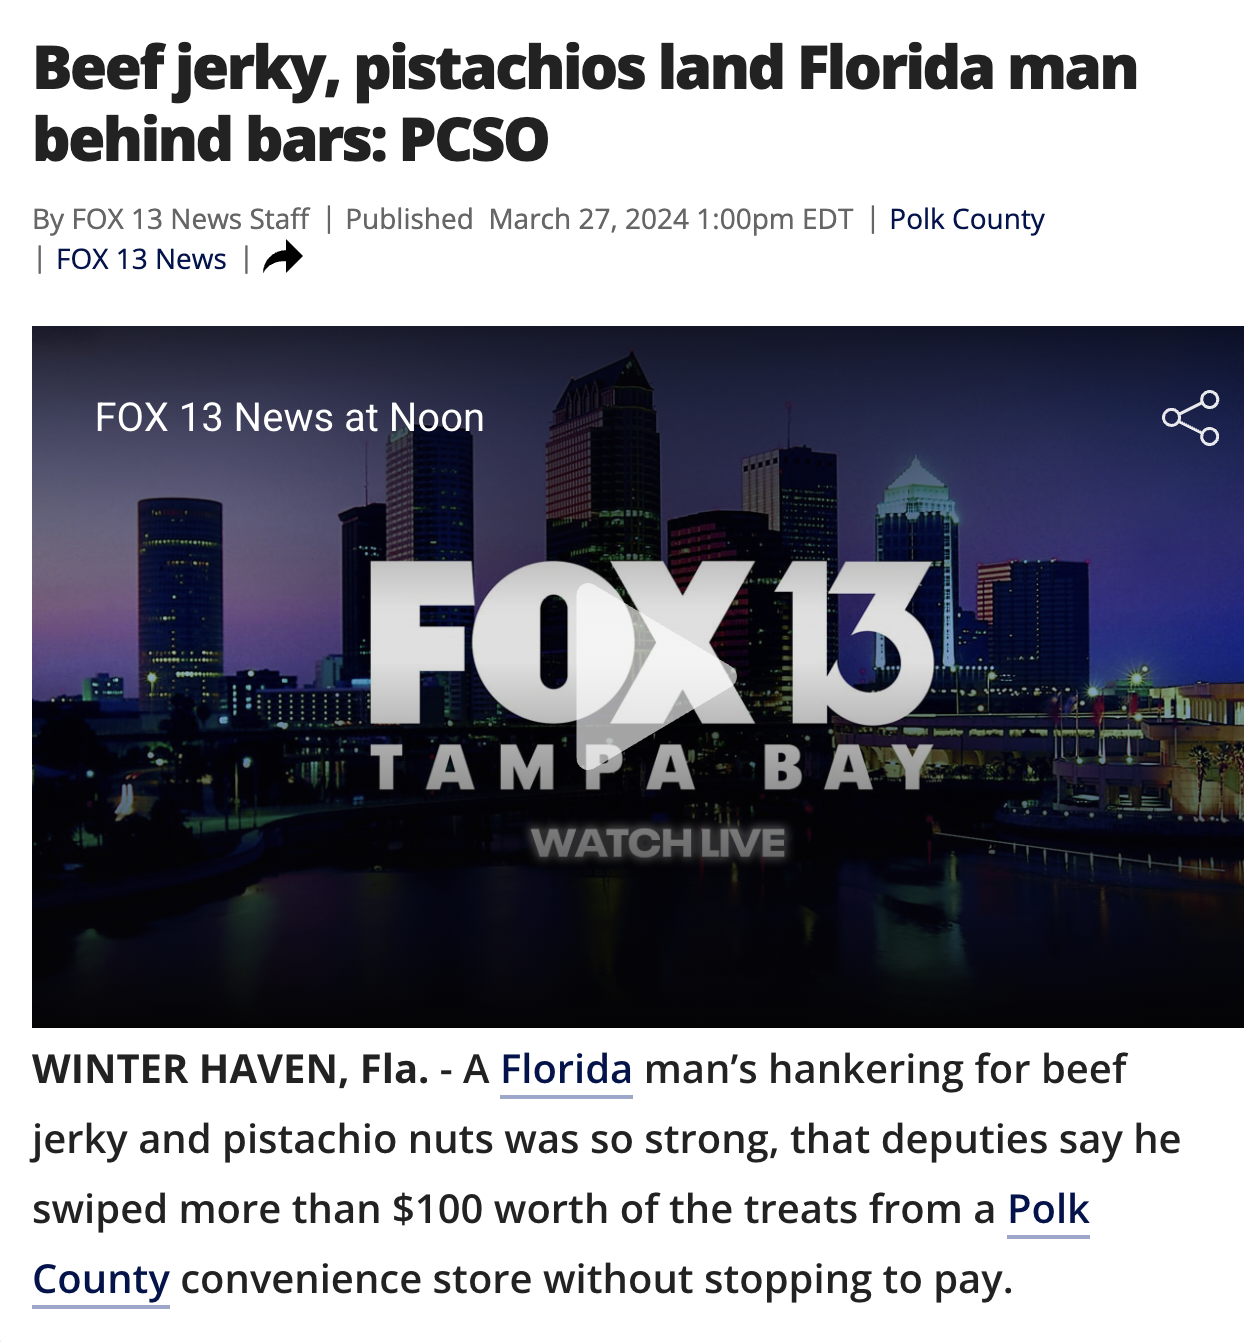 cityscape - Beef jerky, pistachios land Florida man behind bars Pcso By Fox 13 News Staff | Published pm Edt | Polk County Fox 13 News Fox 13 News at Noon Fox 13. Tampa Bay Watch Live Winter Haven, Fla. A Florida man's hankering for beef jerky and pistach